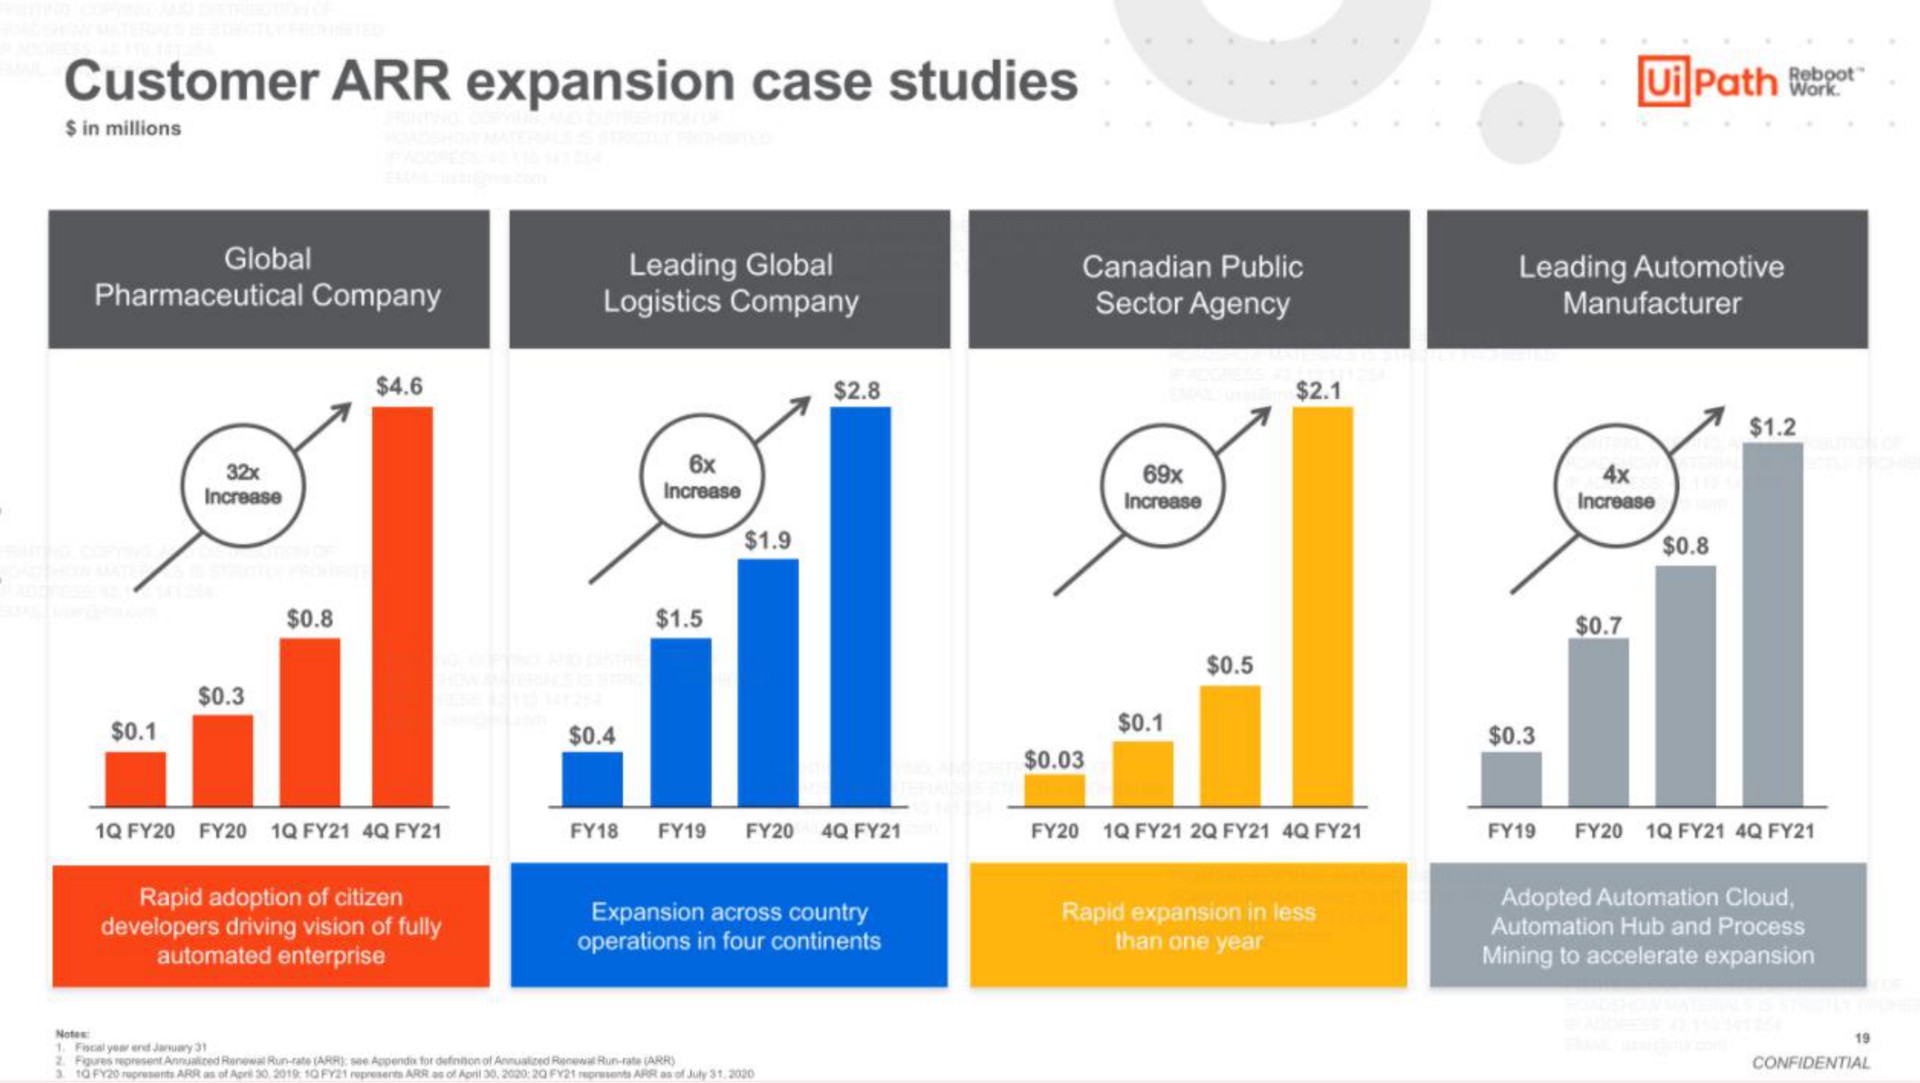 path see customer expansion case studies | UiPath